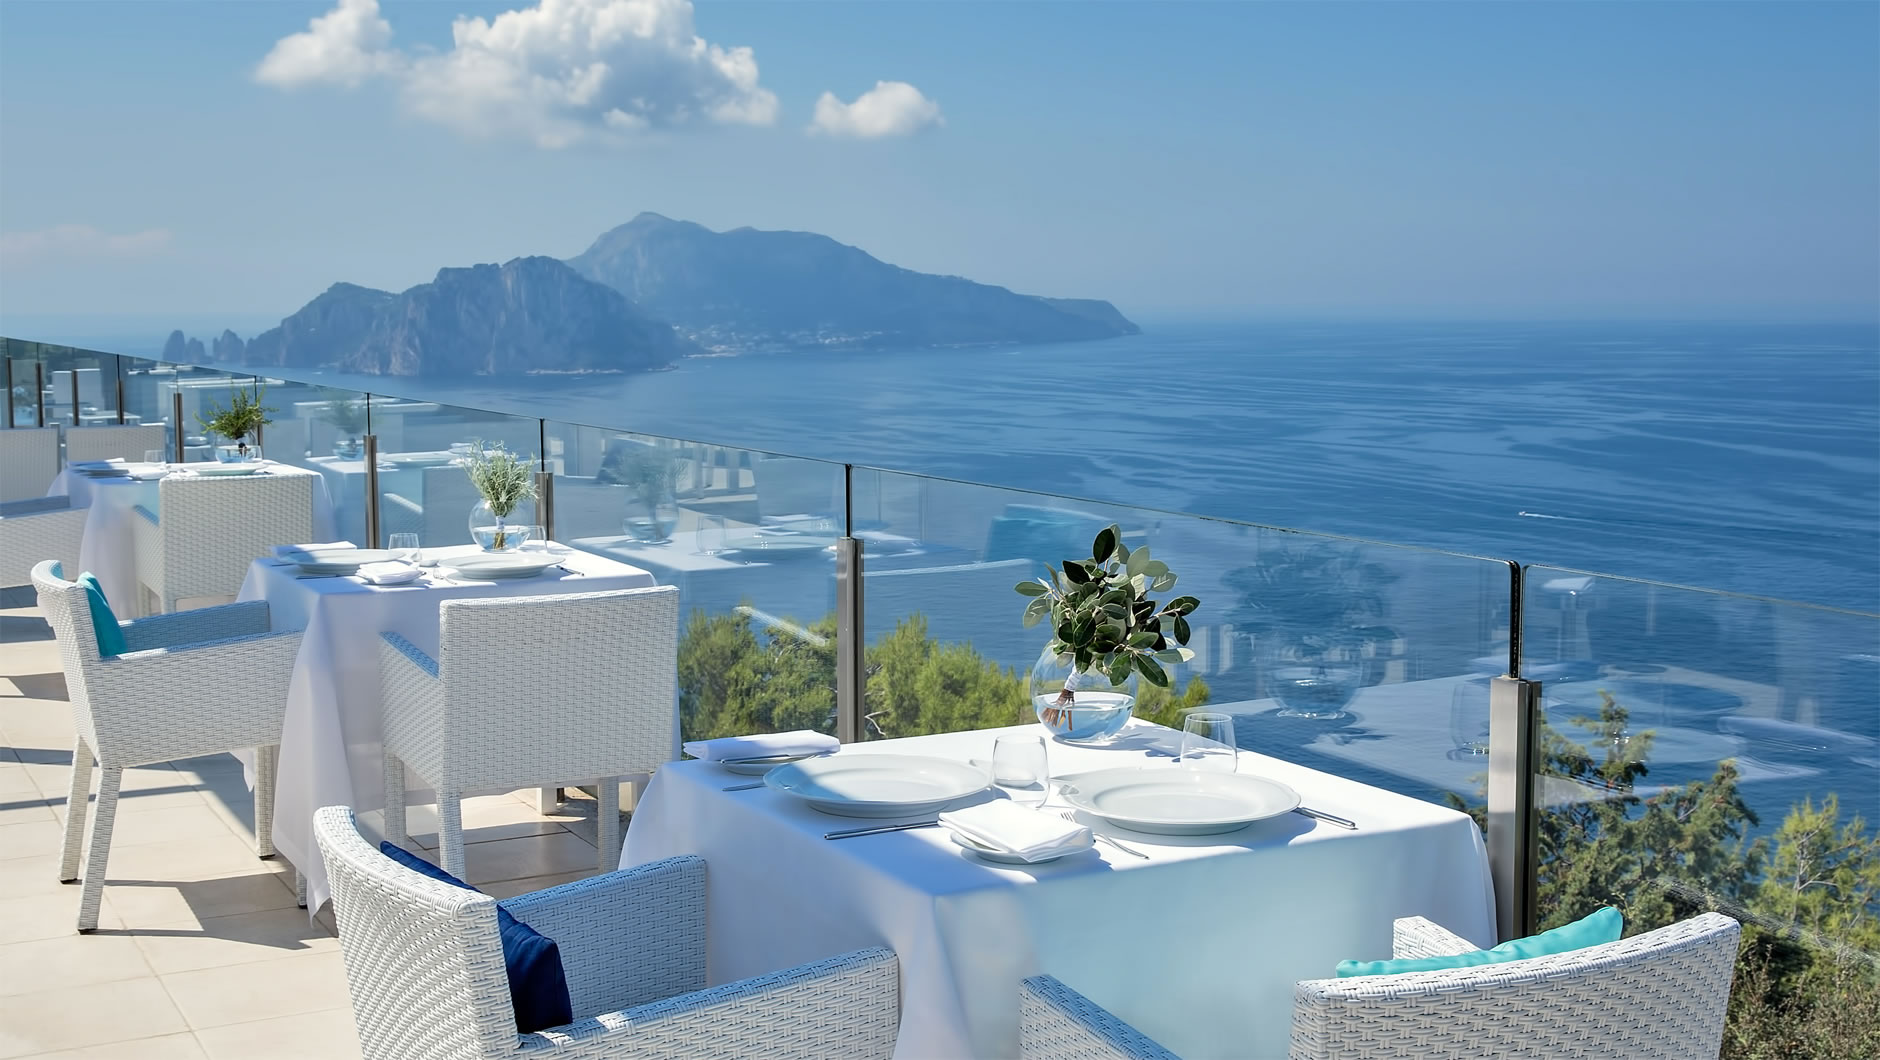 Relais Blu Official Website Boutique Hotel Fine Dining Restaurant In The Amalfi Coast